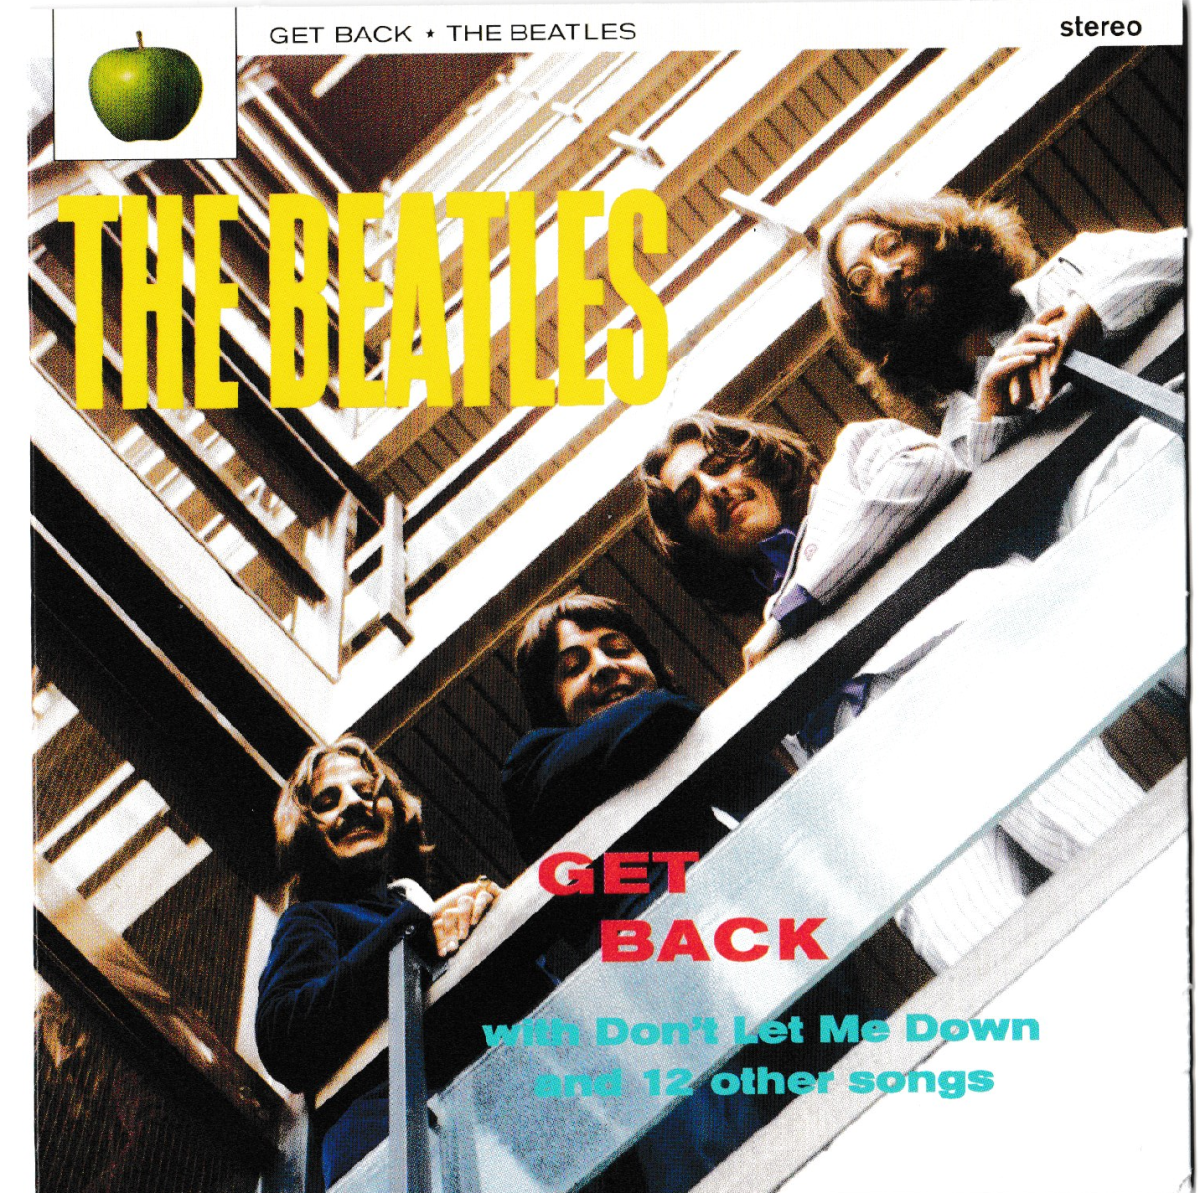 Get Back album from the box set